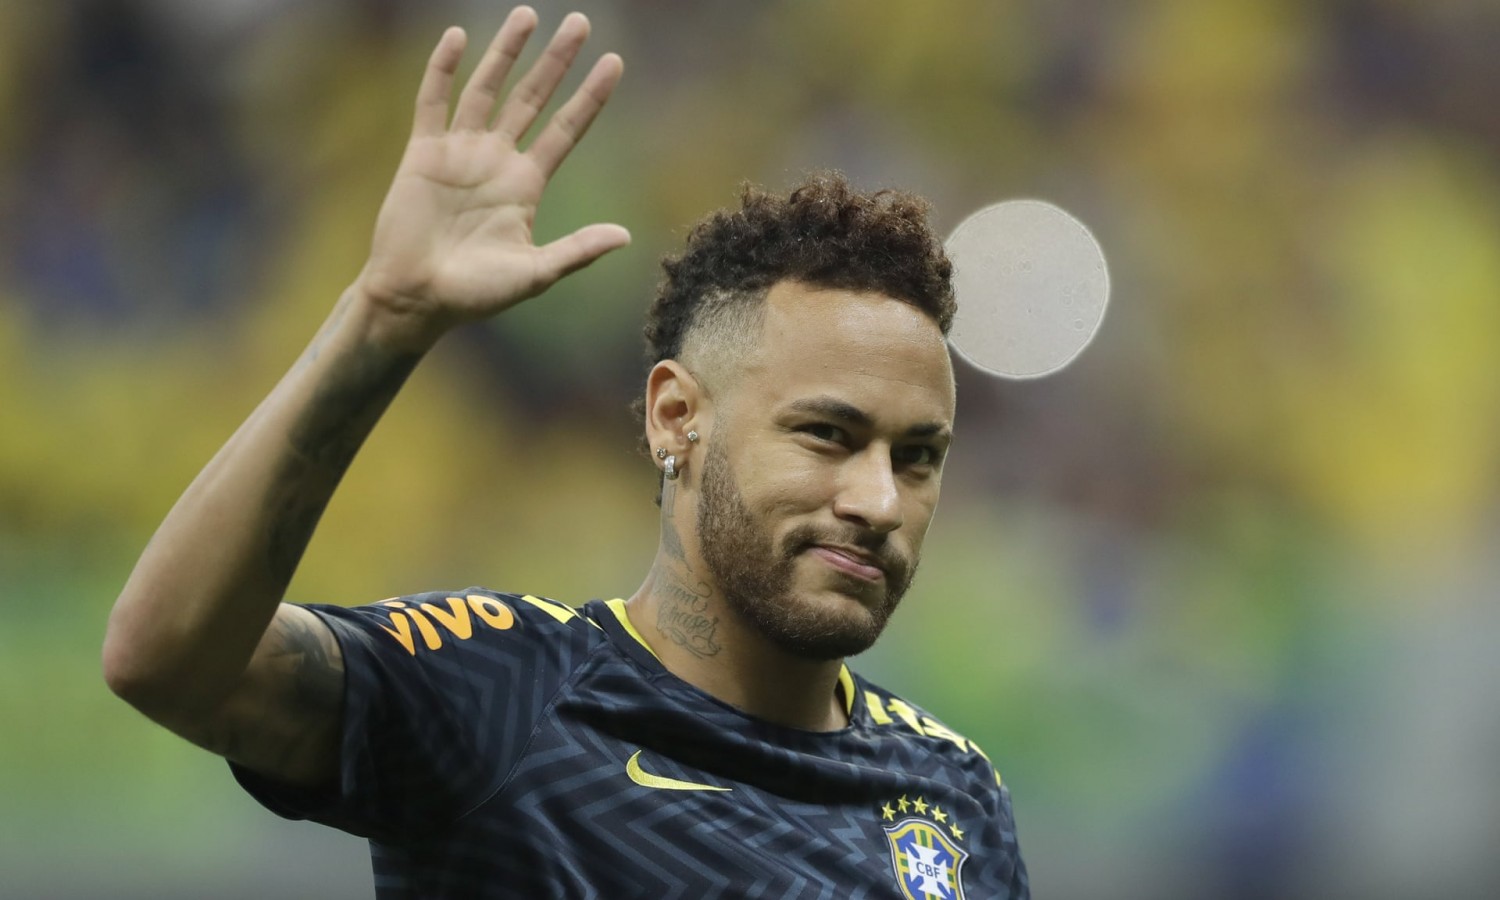 Is Neymar’s time in Paris coming to an end? Photograph: André Penner/AP